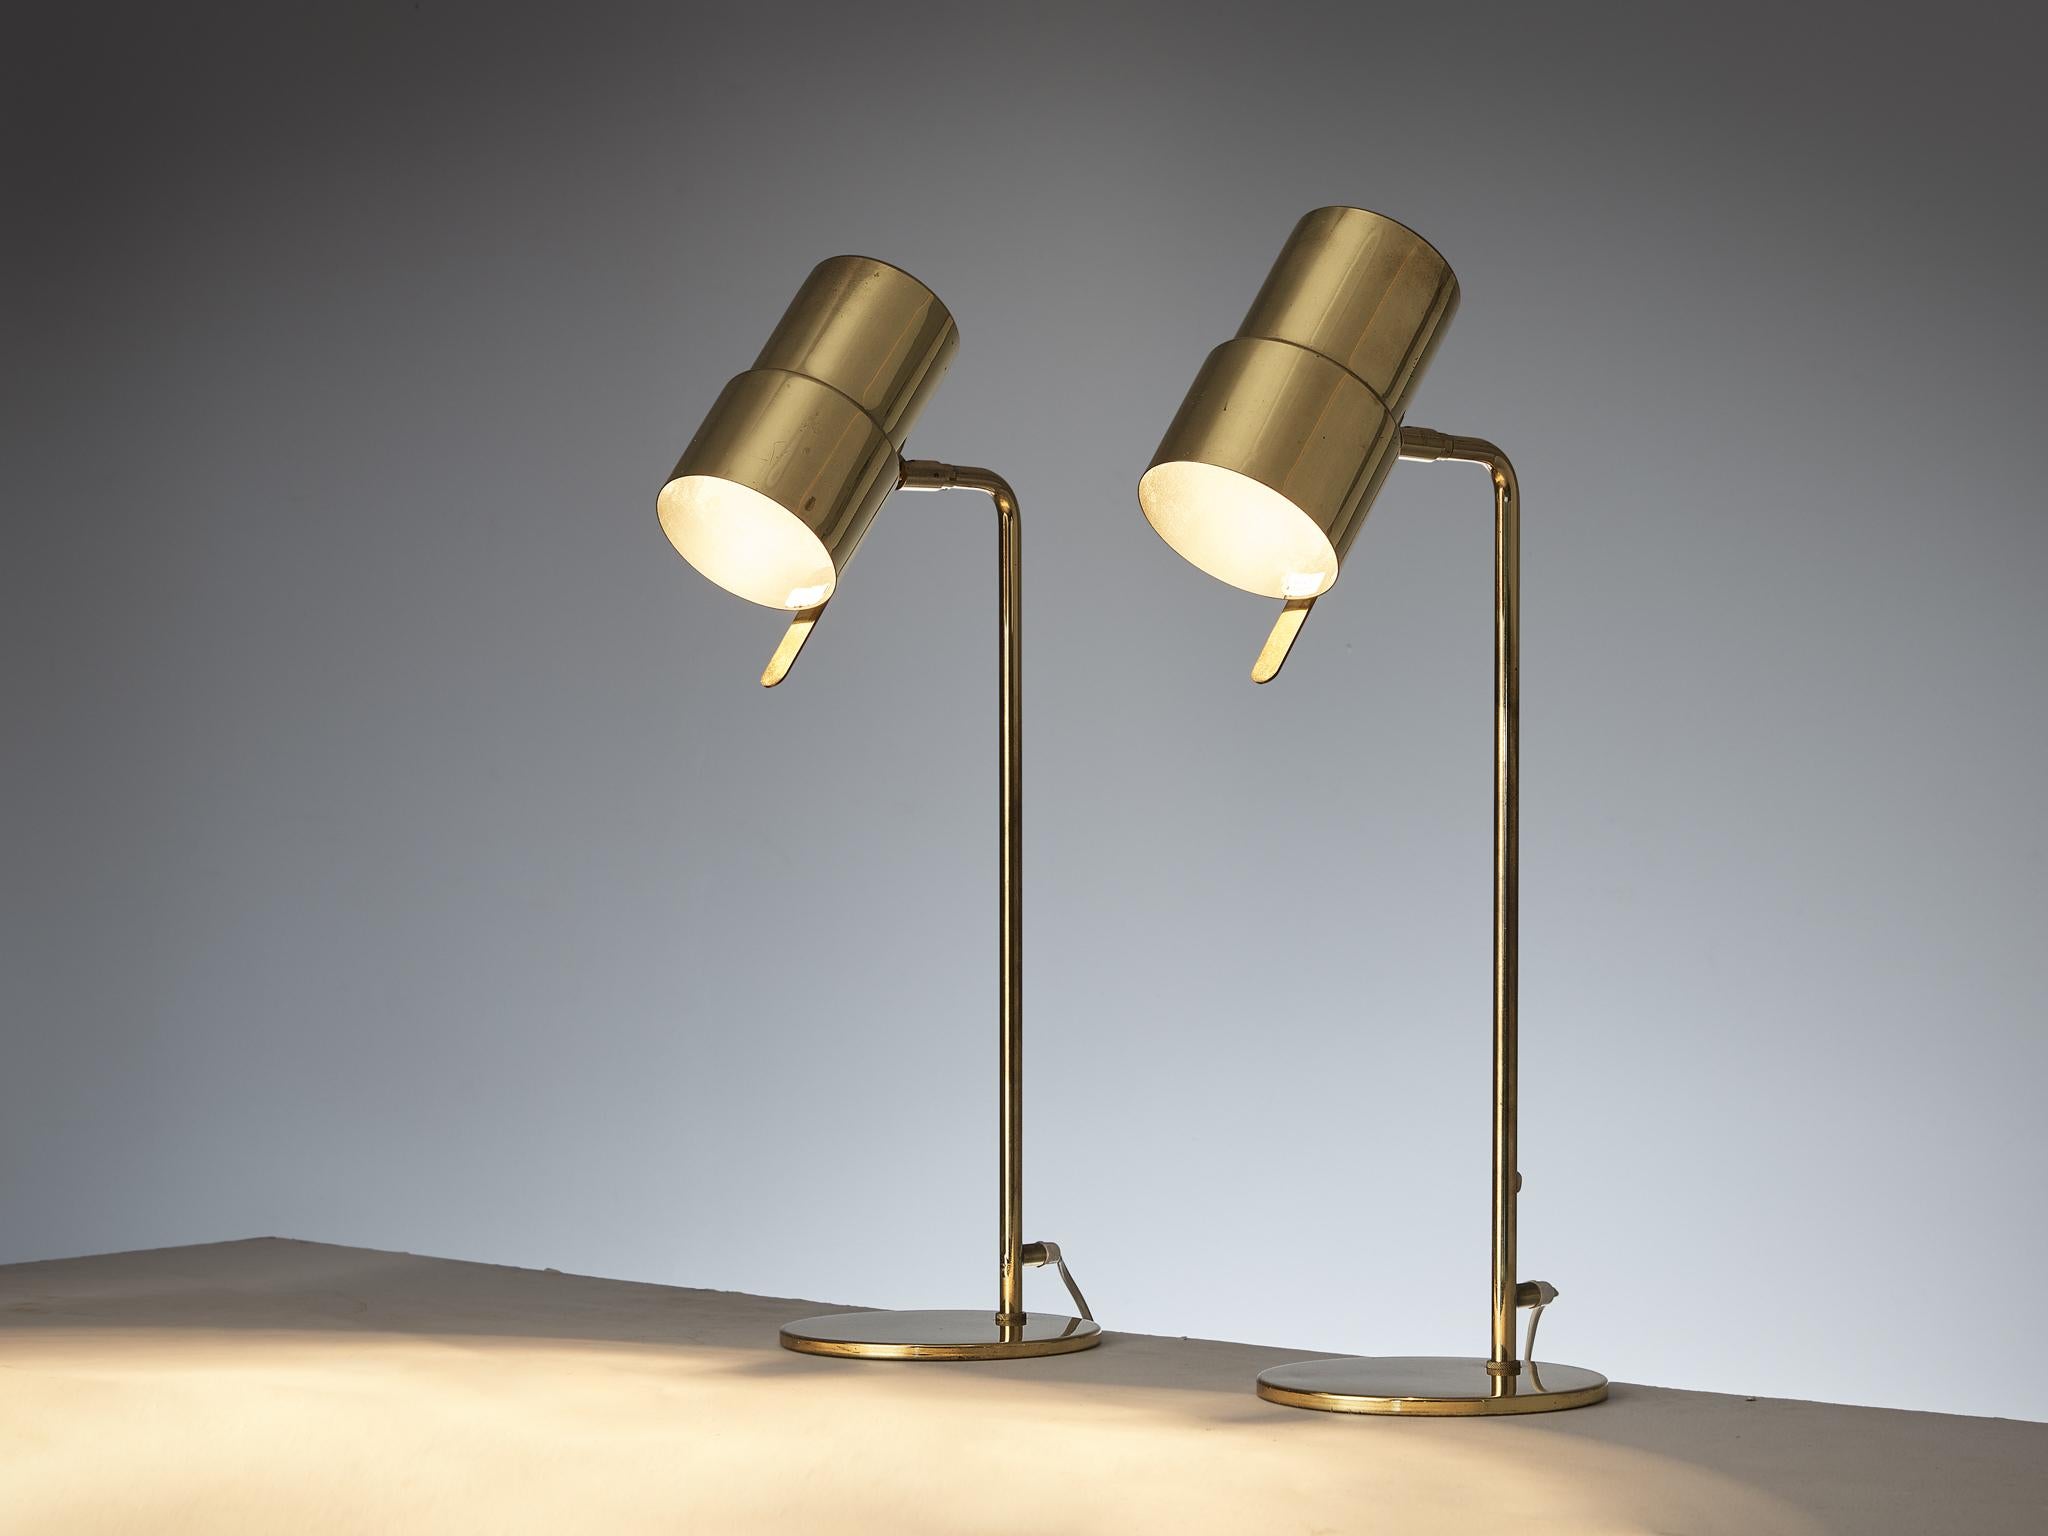 Hans-Agne Jakobsson manufactured in Markaryd, table / desk lamps ‘Nicke’ model B195/2, brass, metal, Sweden, 1960s 

This rare desk lamp is designed by the renowned Swedish designer Hans-Agne Jakobsson. The piece embodies a splendid construction